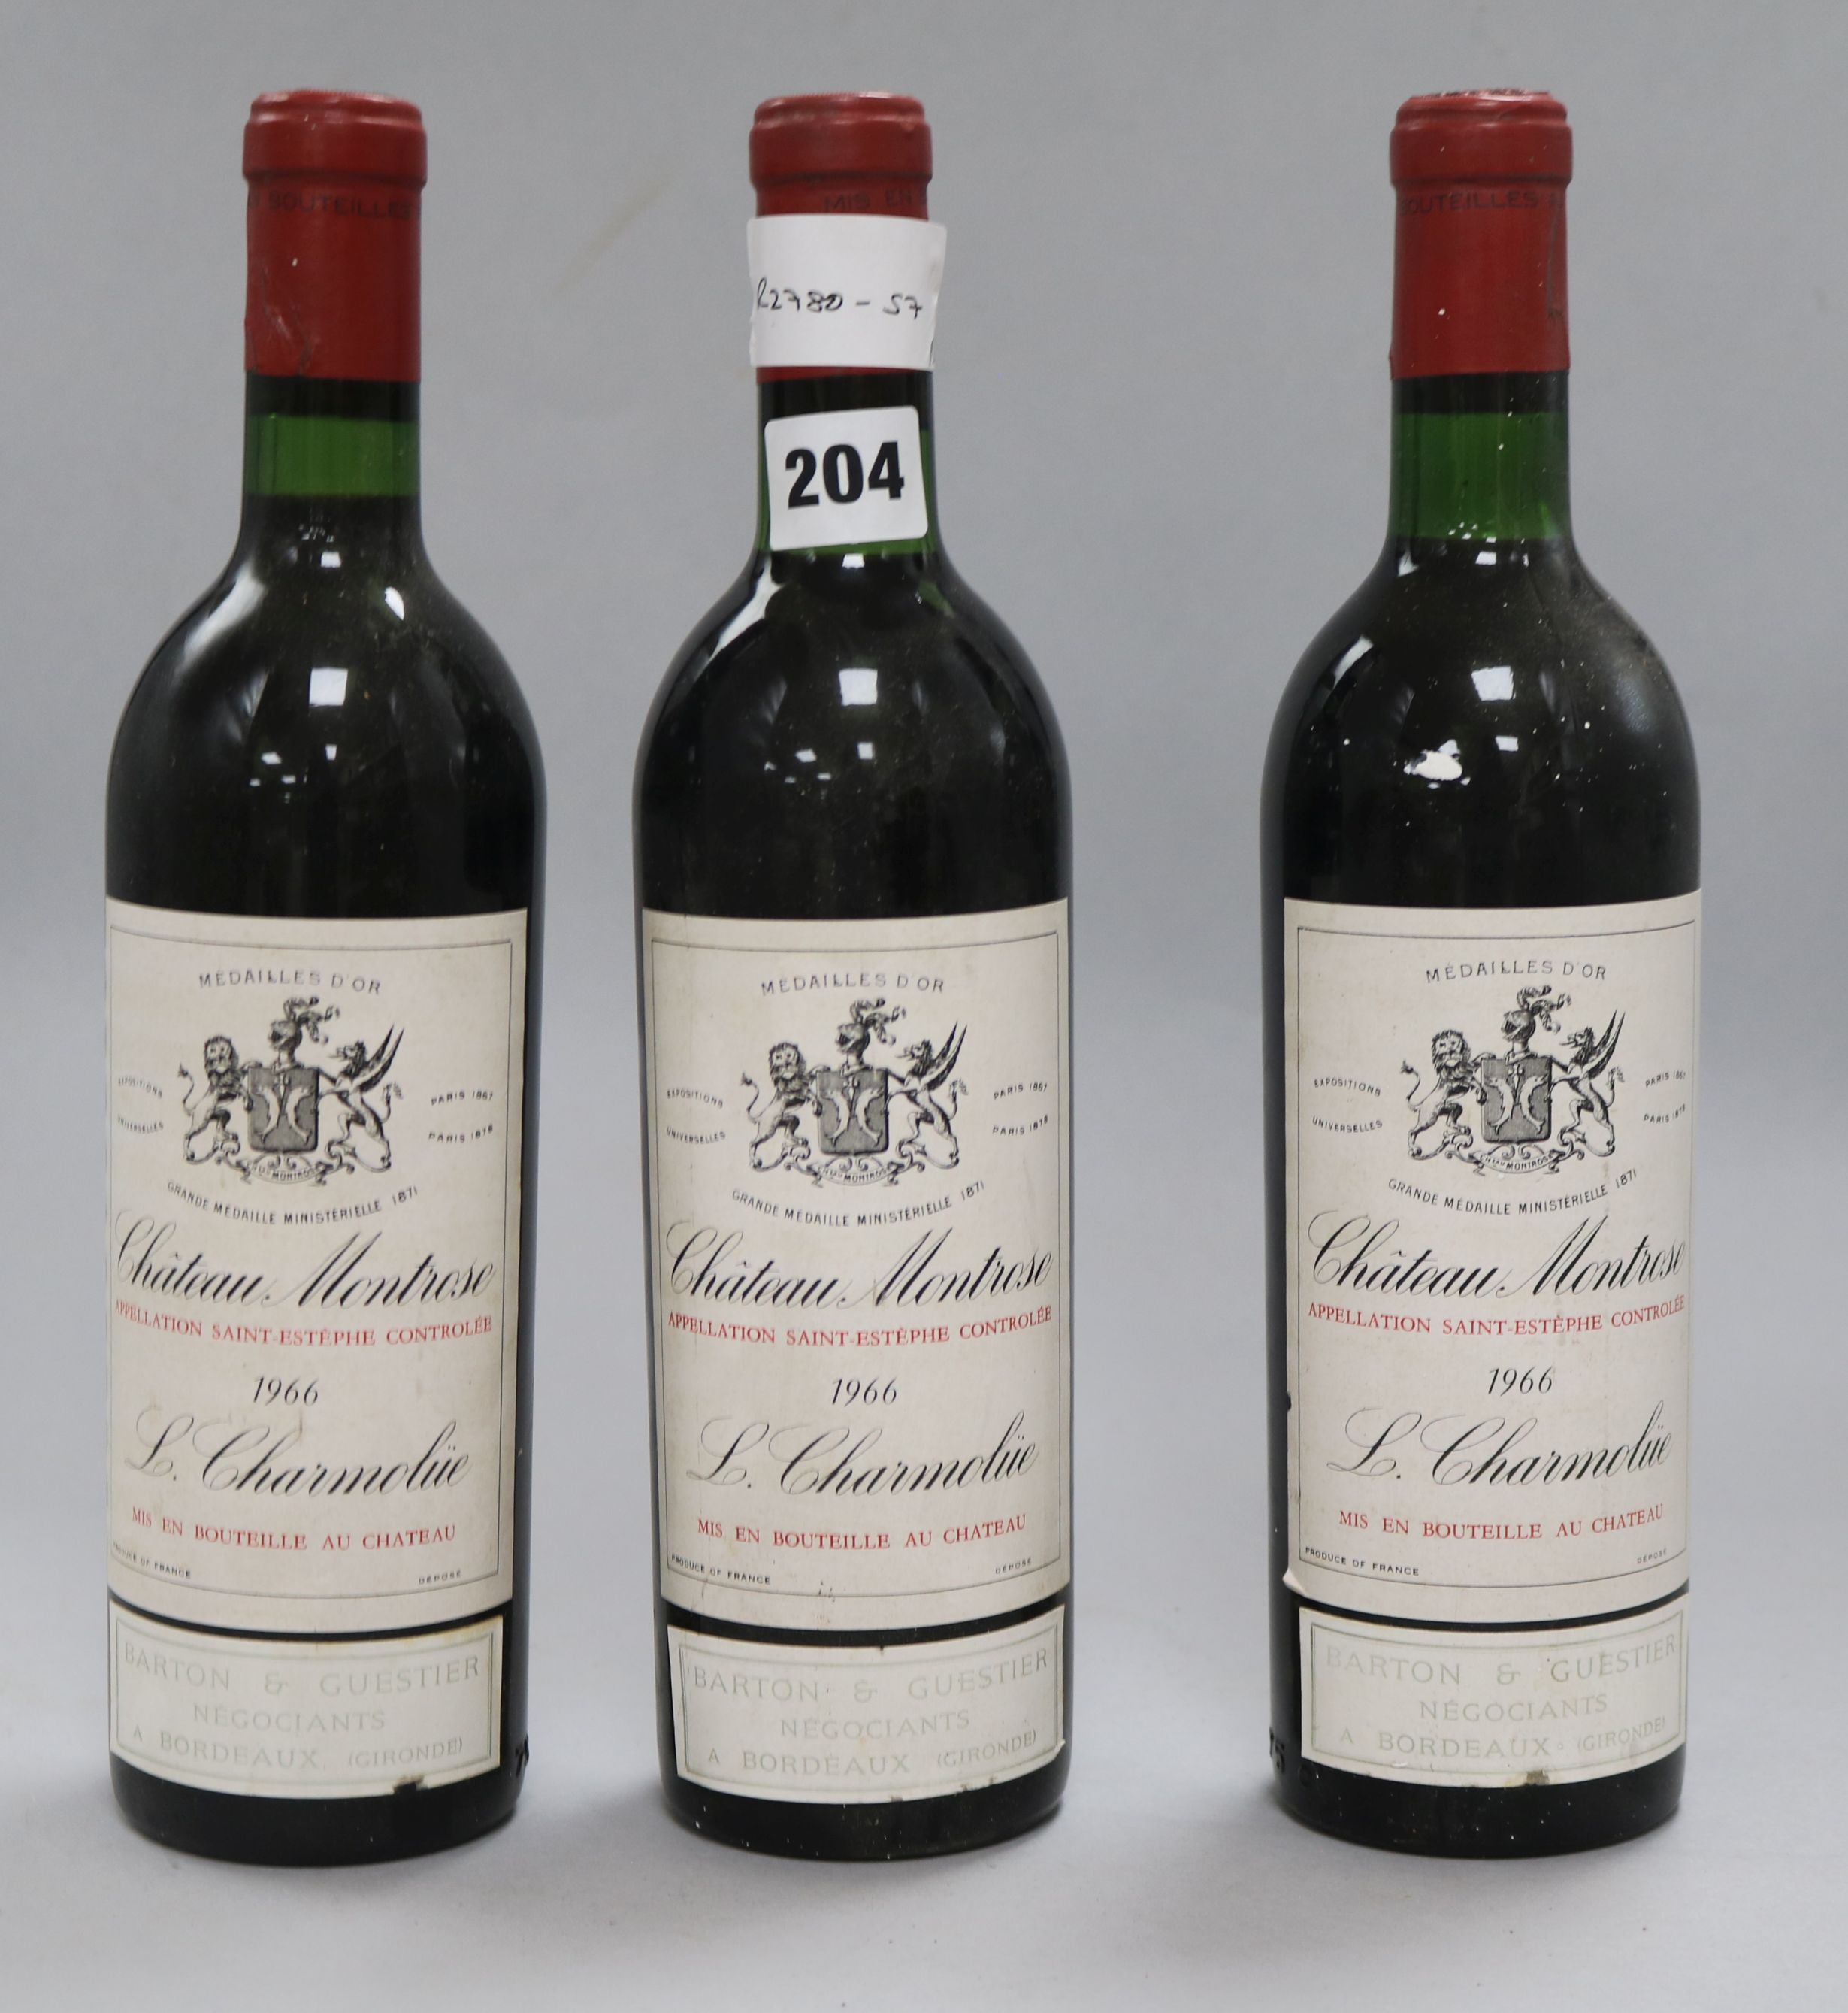 Three bottles of Chateau Montrose 1966